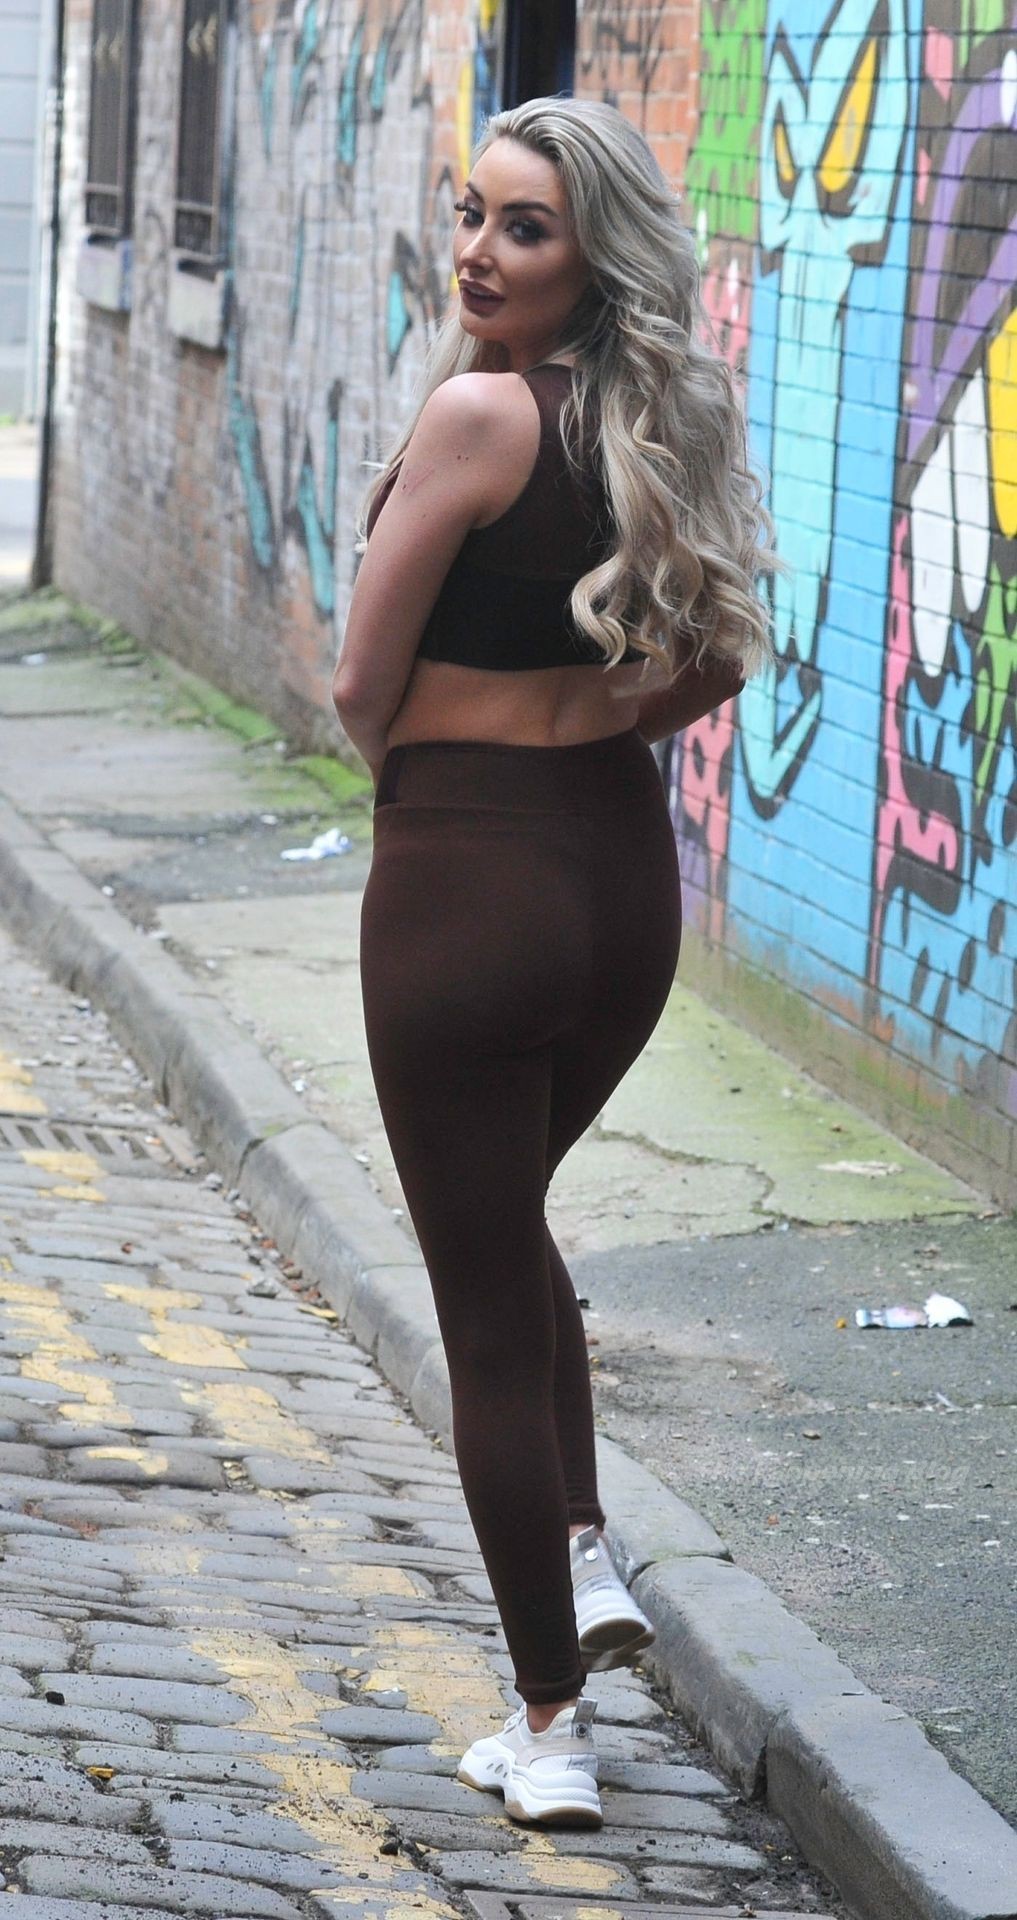 Chloe Crowhurst is Spotted Out for a Walk (9 Photos)